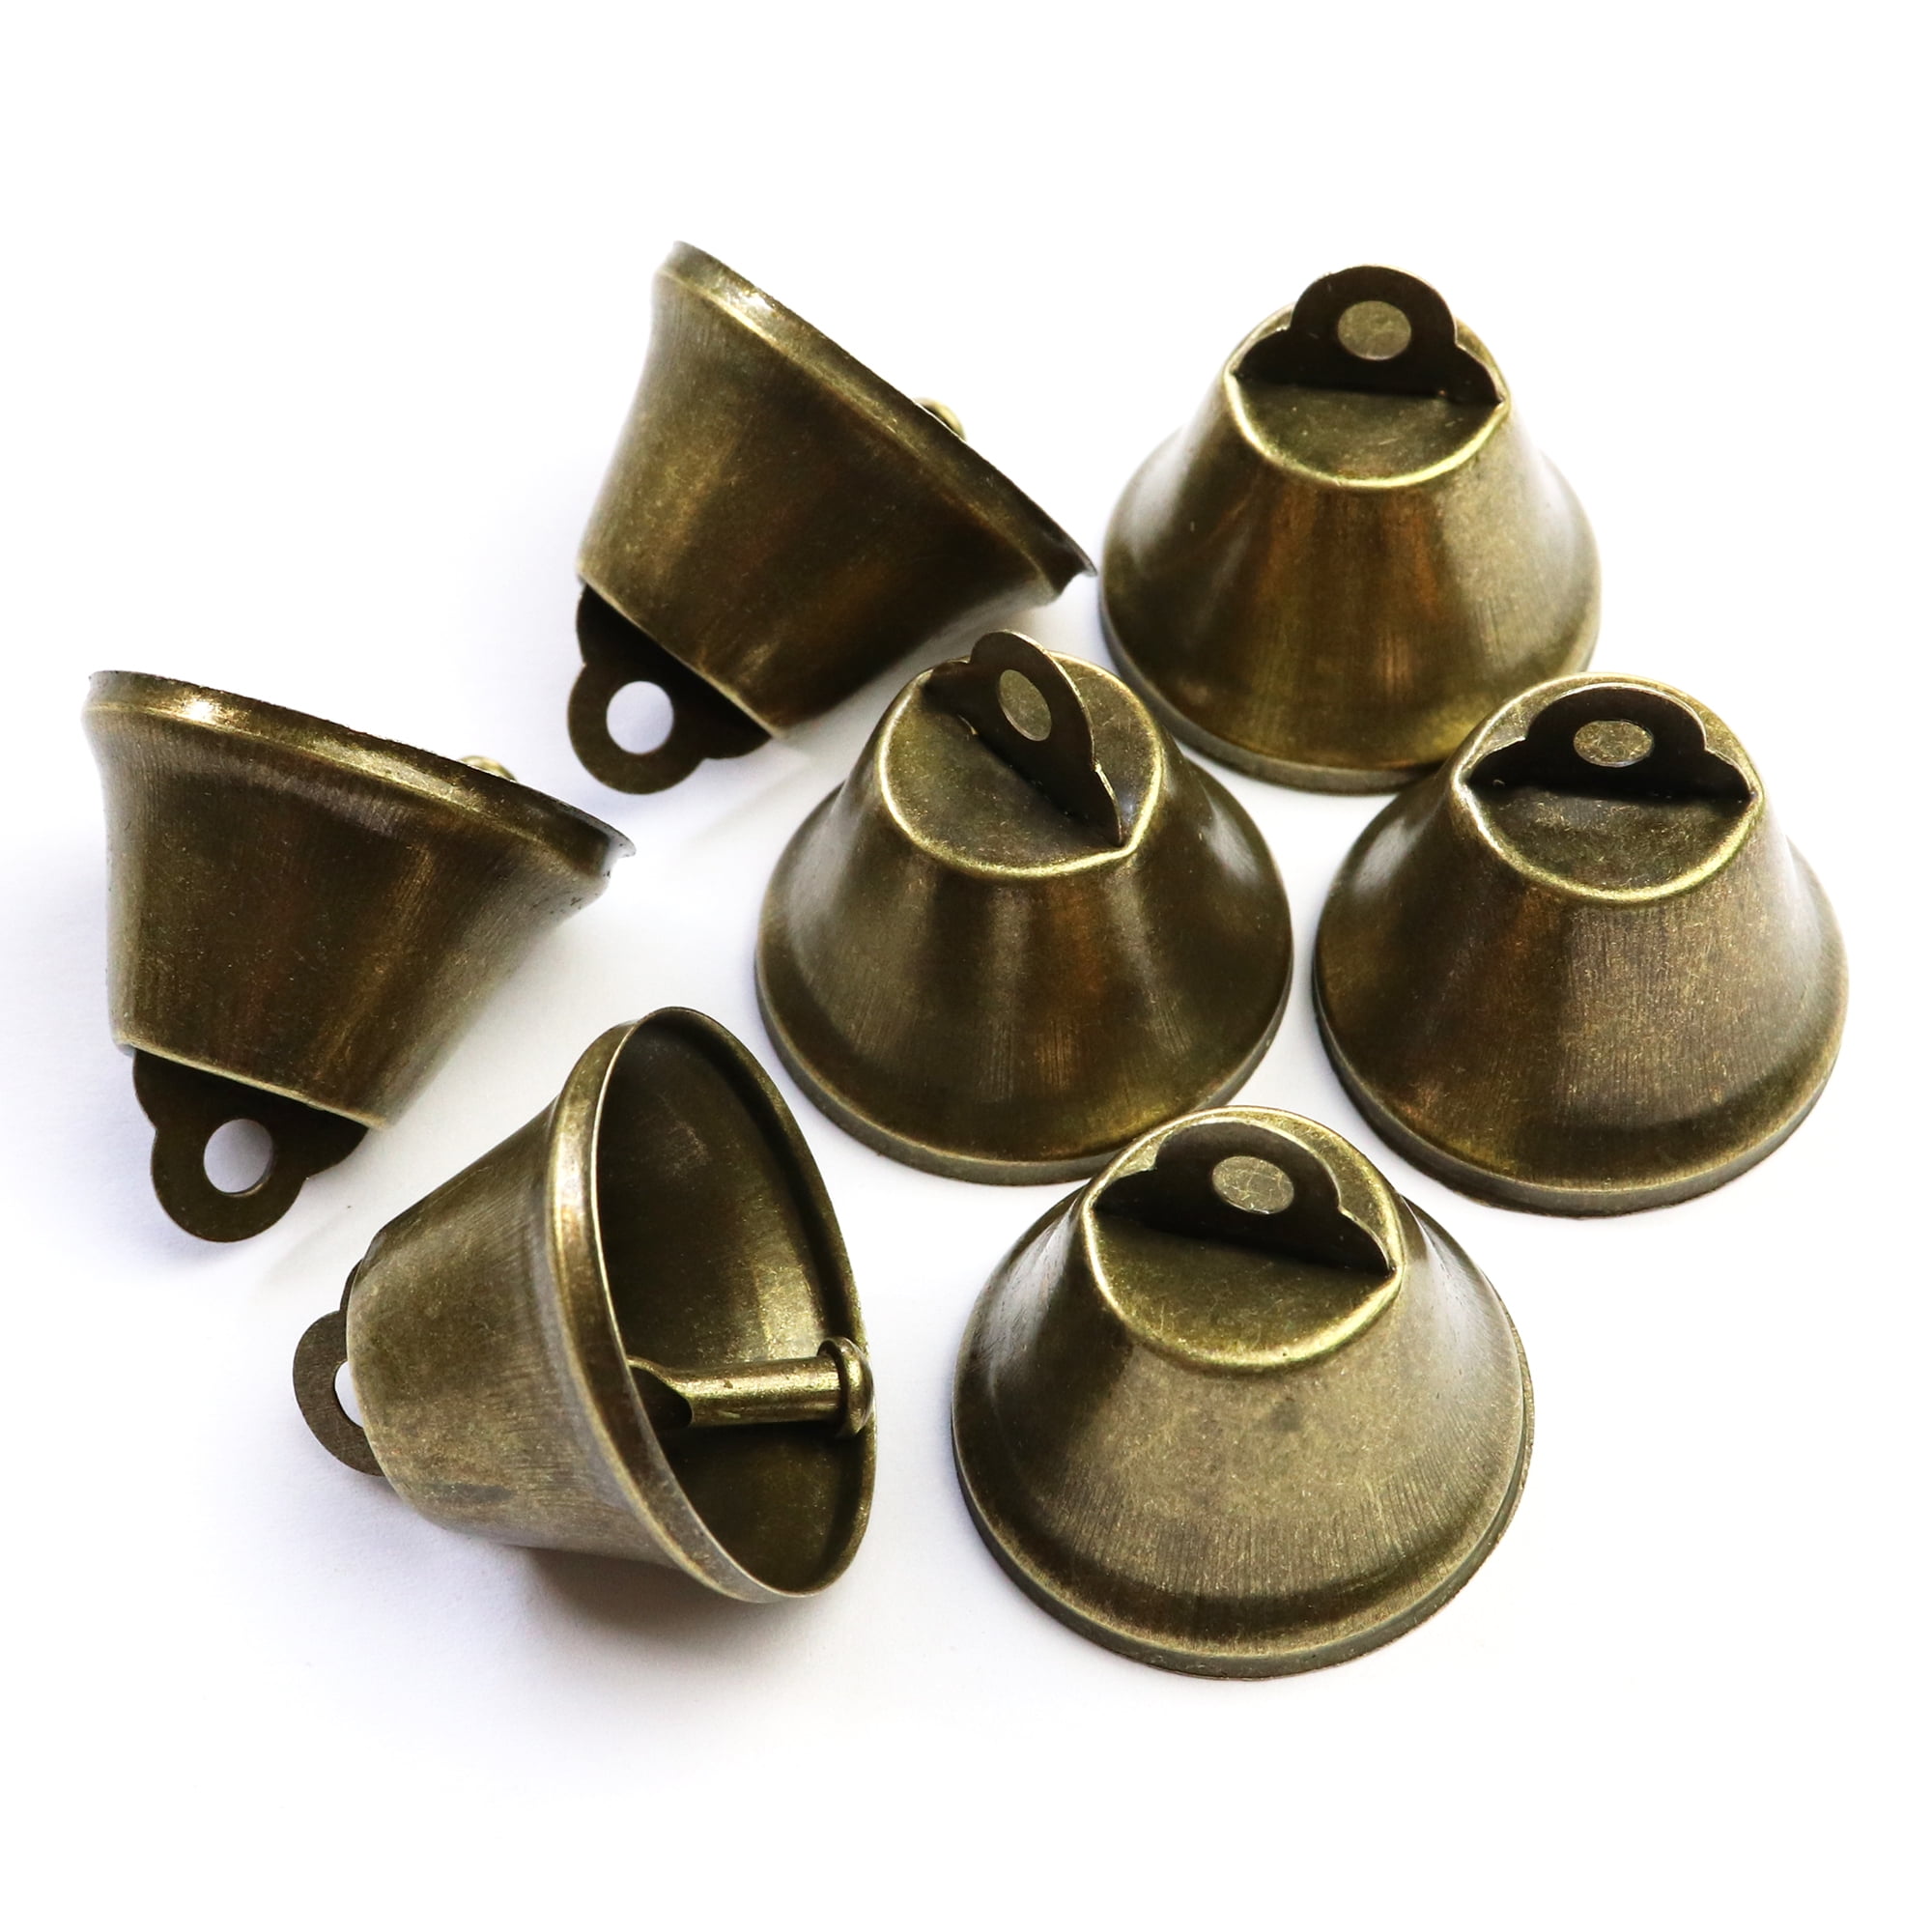 Vintage Brass Craft Brass Bell For Christmas Decorations, Dog Training  Doorbell, Tree 1.65 X 1.,5 Inch Bronze Dr. Dhasy Hanging Wind Chimes From  Lavacakeshop, $0.27